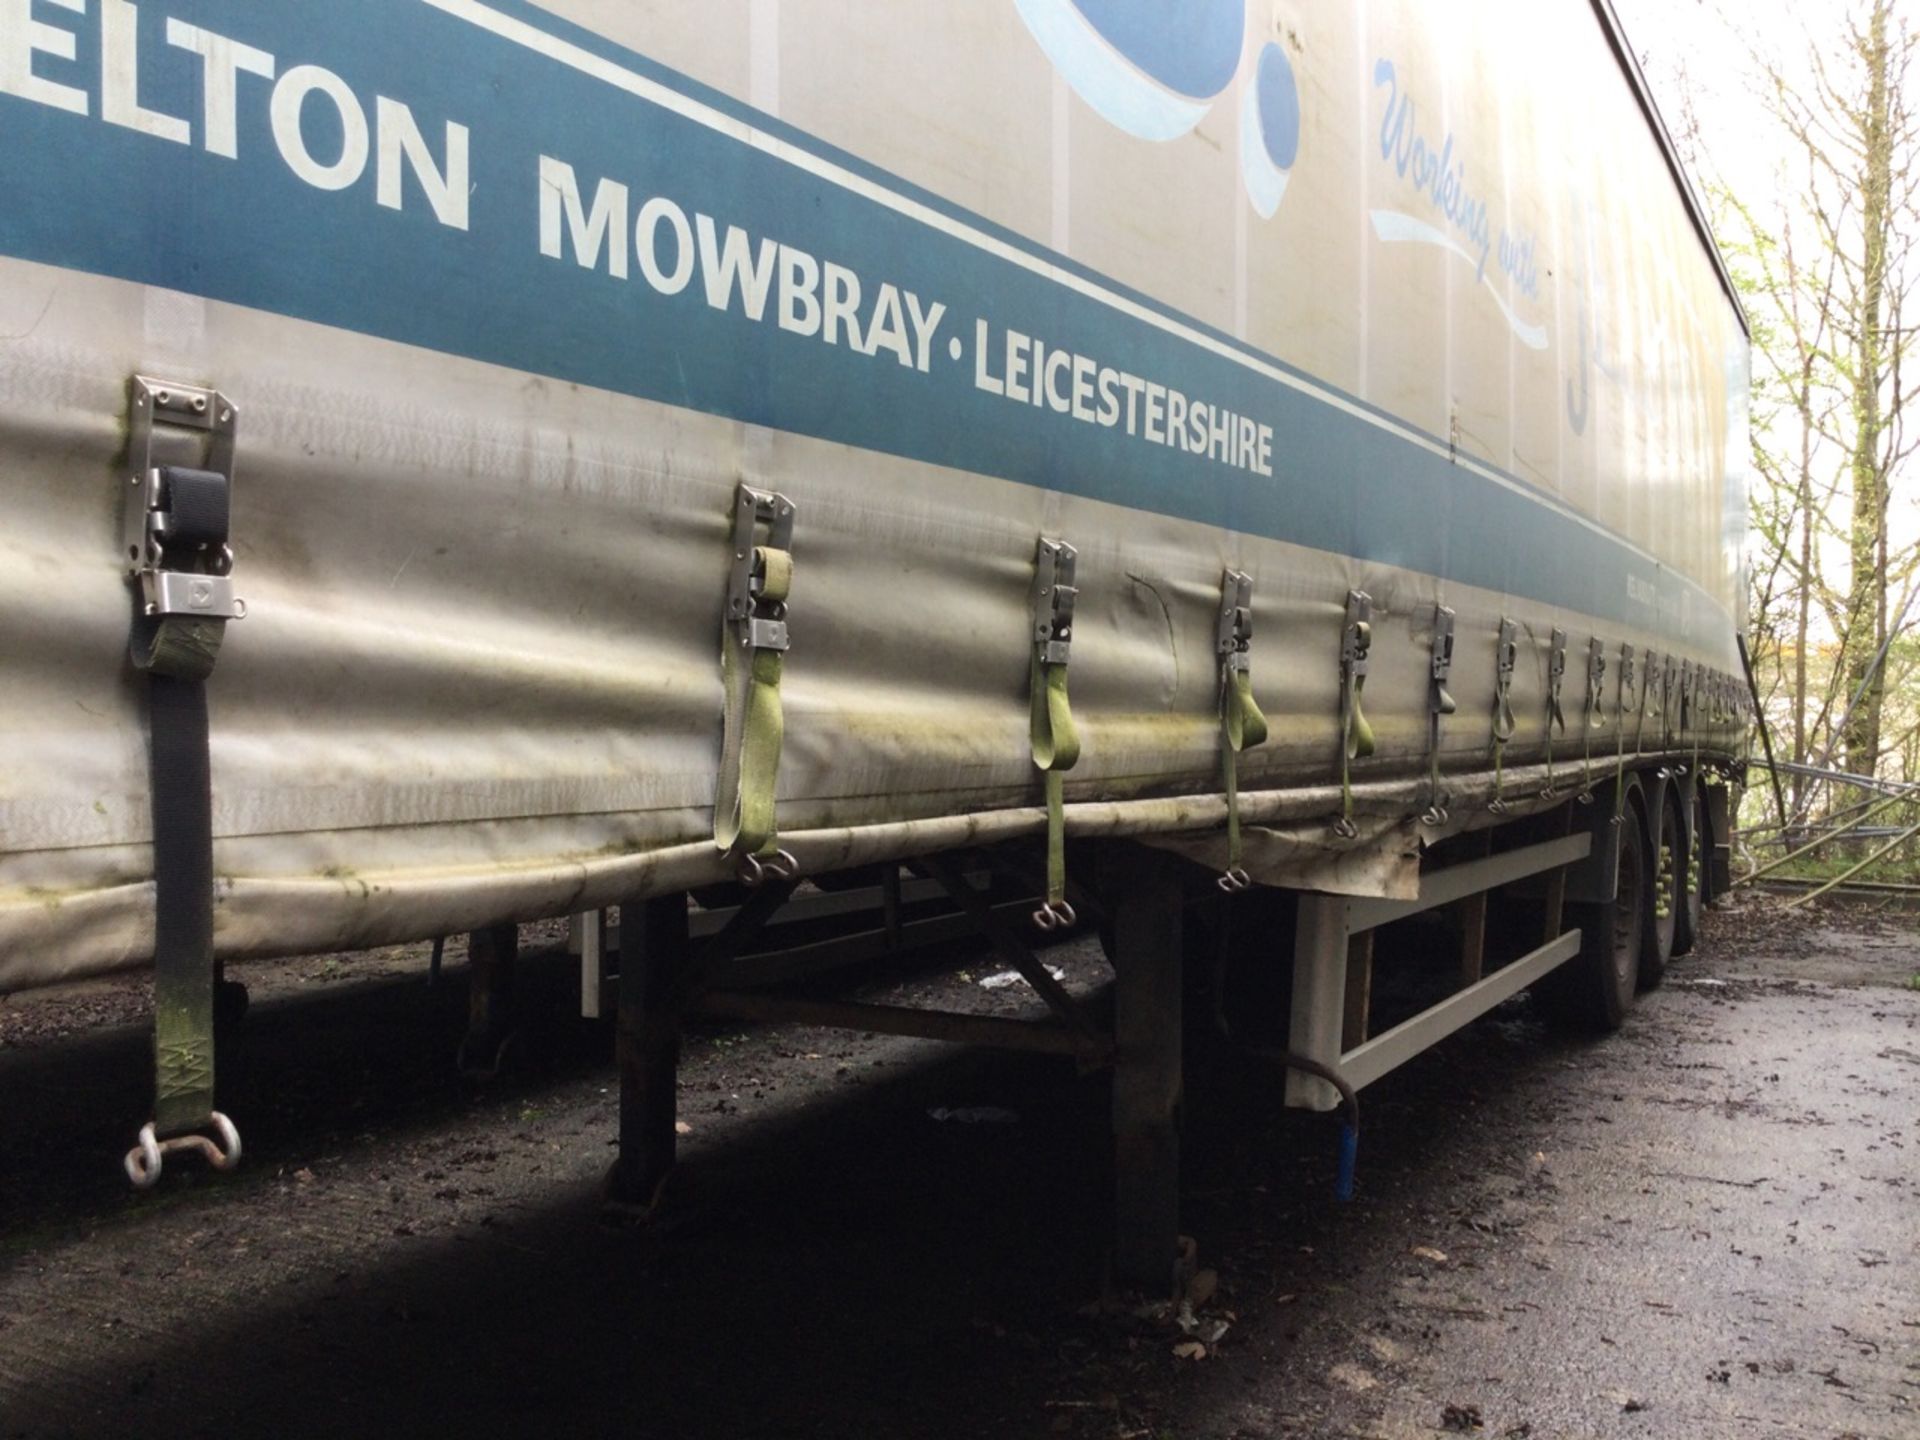 Lawrence David Tri-Axle 13.6mtr Curtainside Trailer With Air Suspension Mot Expired, serial number